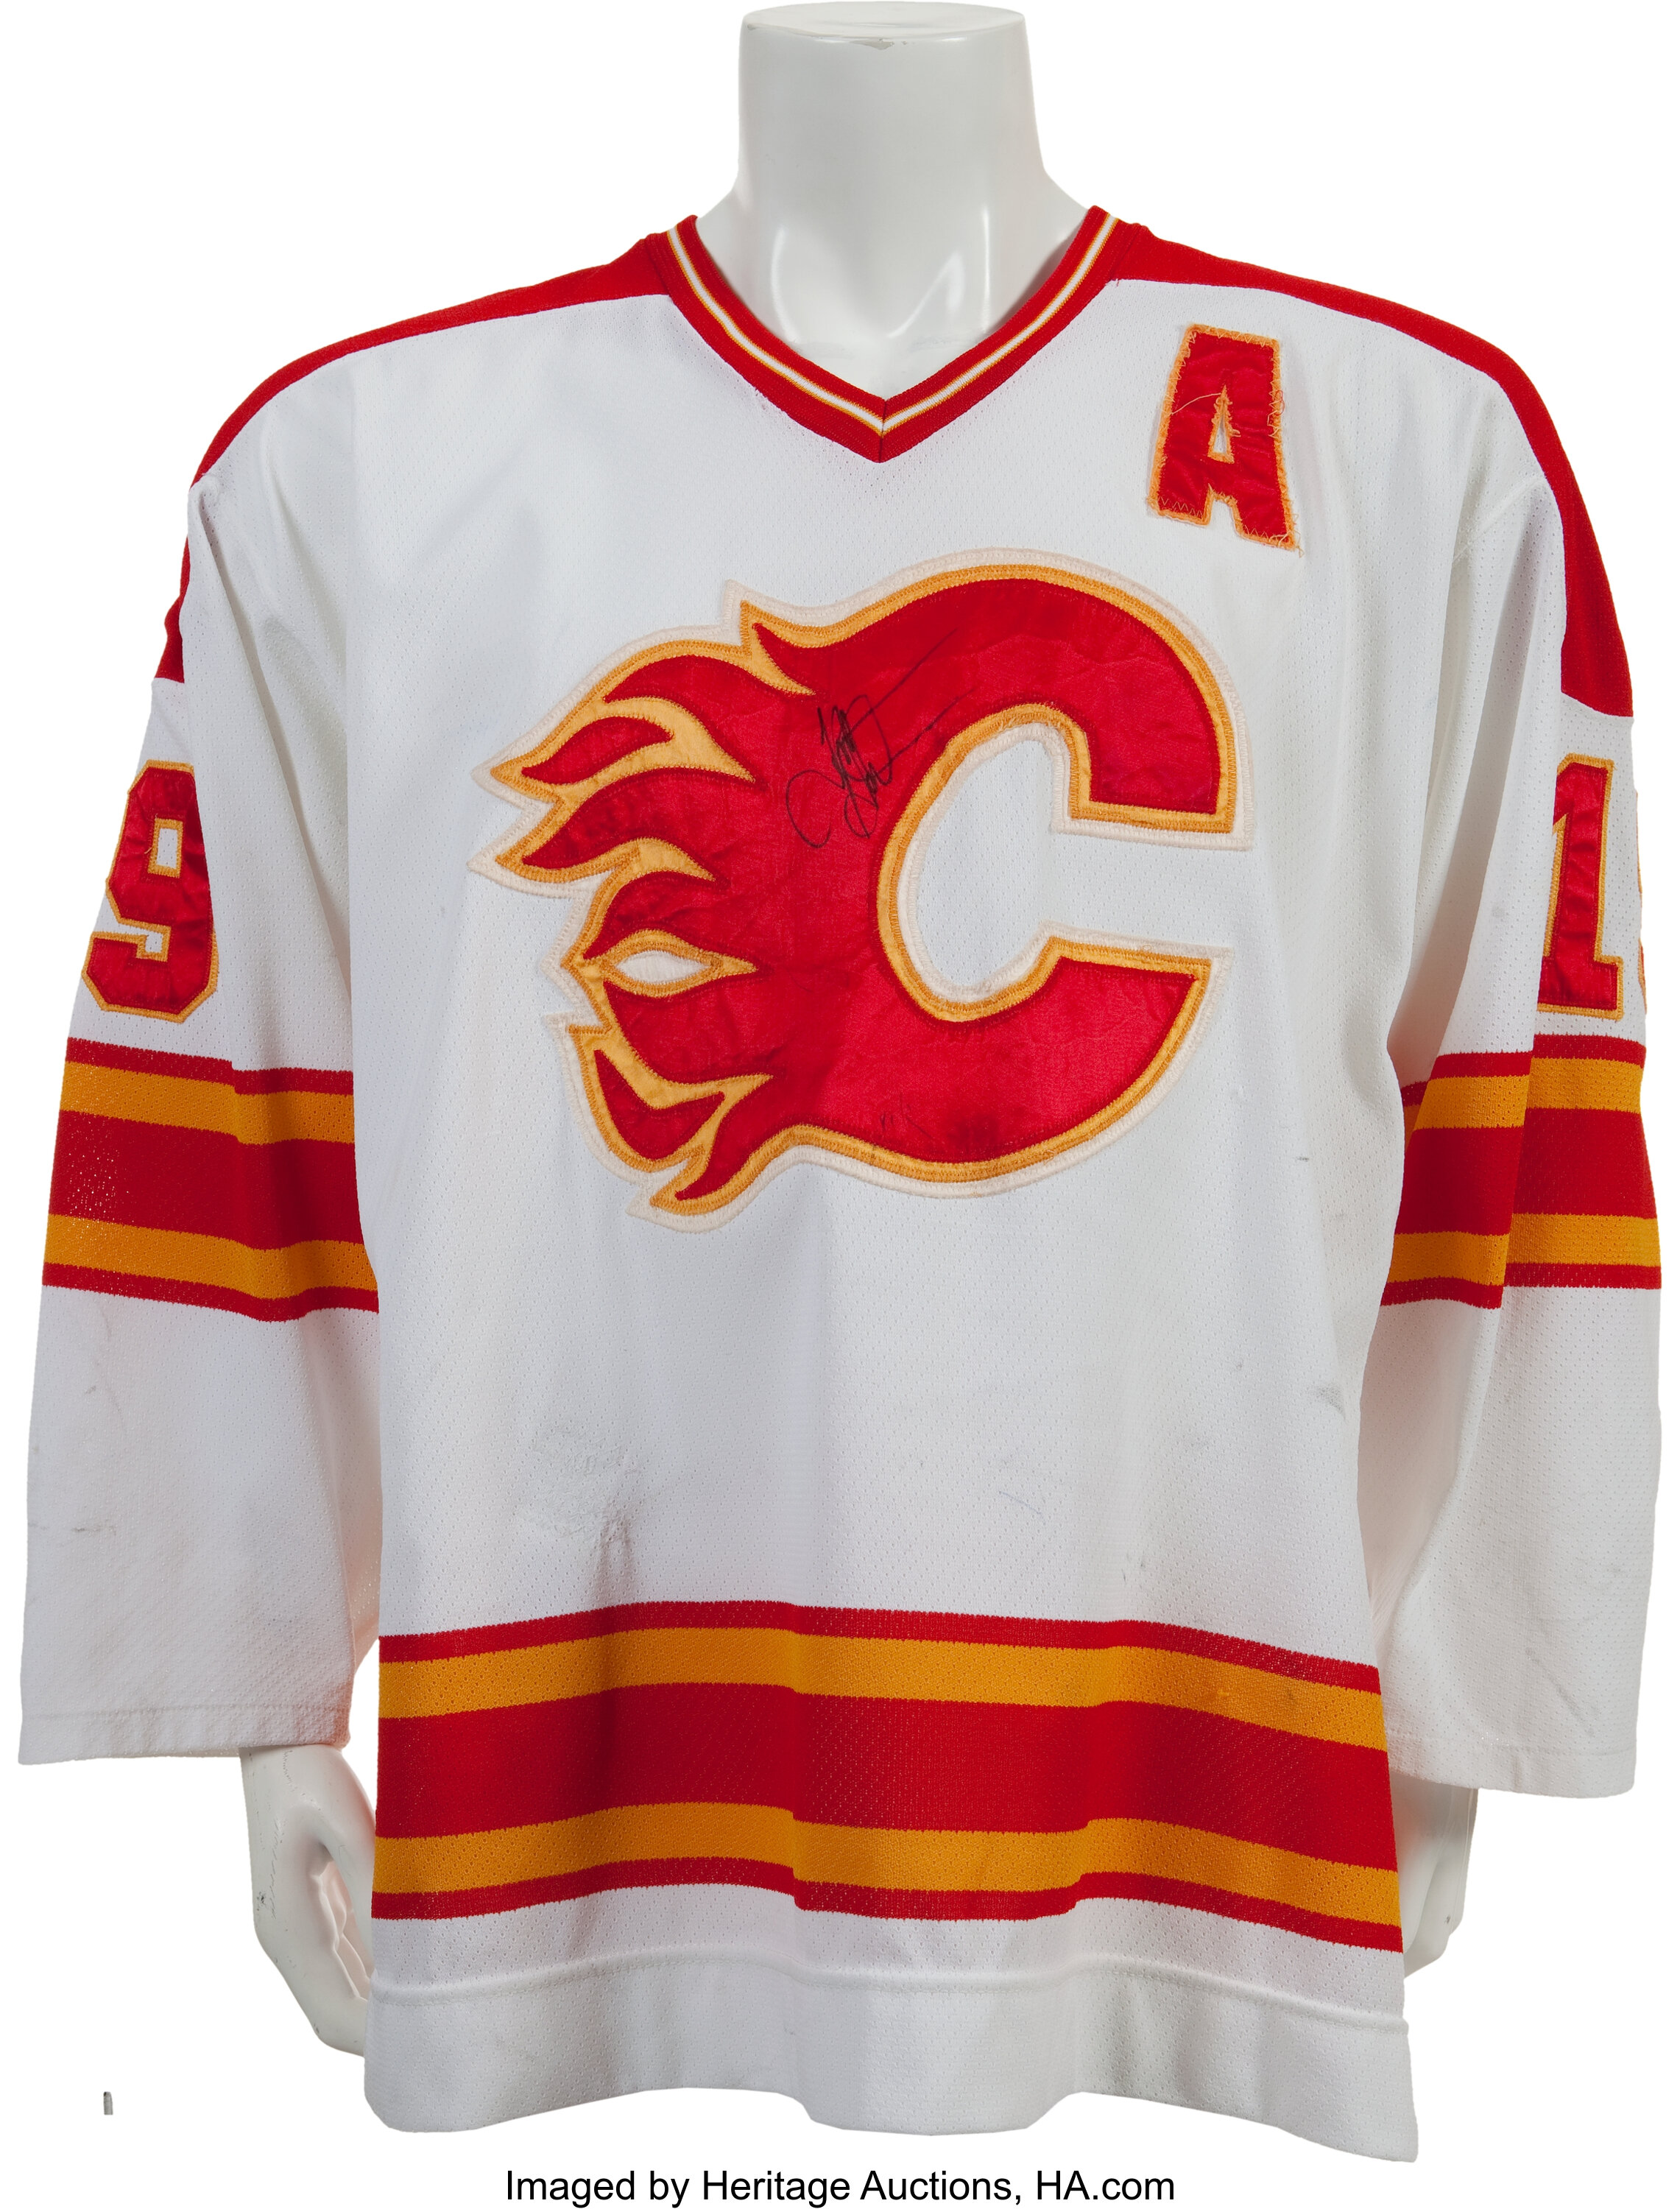 Flames honor 1989 Stanley Cup win with Heritage Classic jerseys